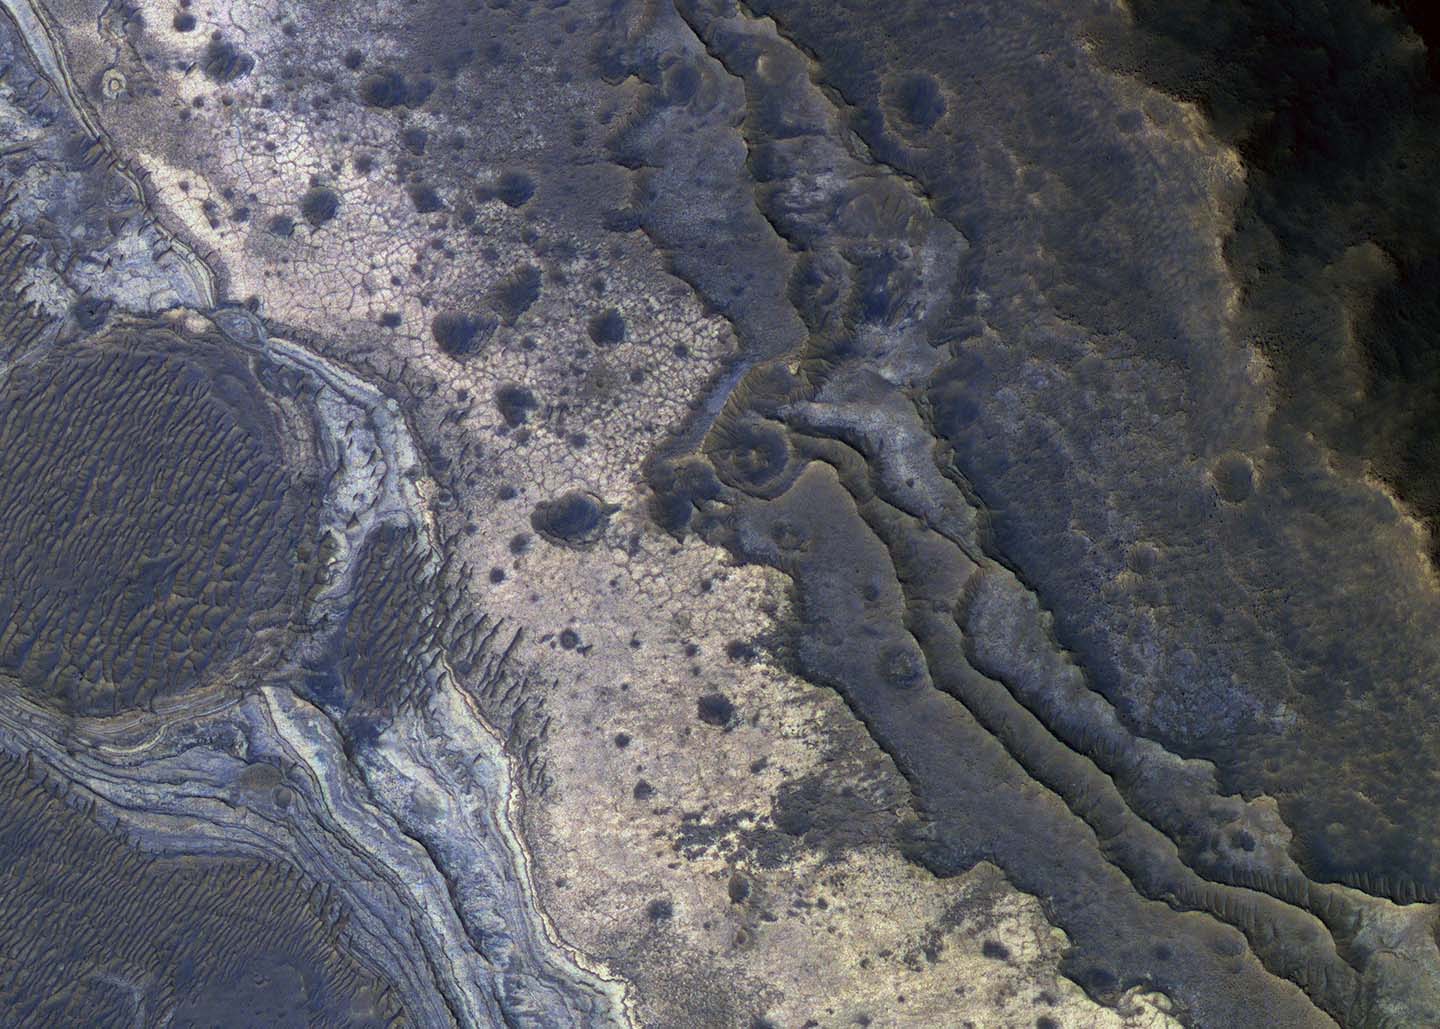 NASA's Mars Reconnaissance Orbiter has revealed Martian rocks containing a hydrated mineral similar to opal